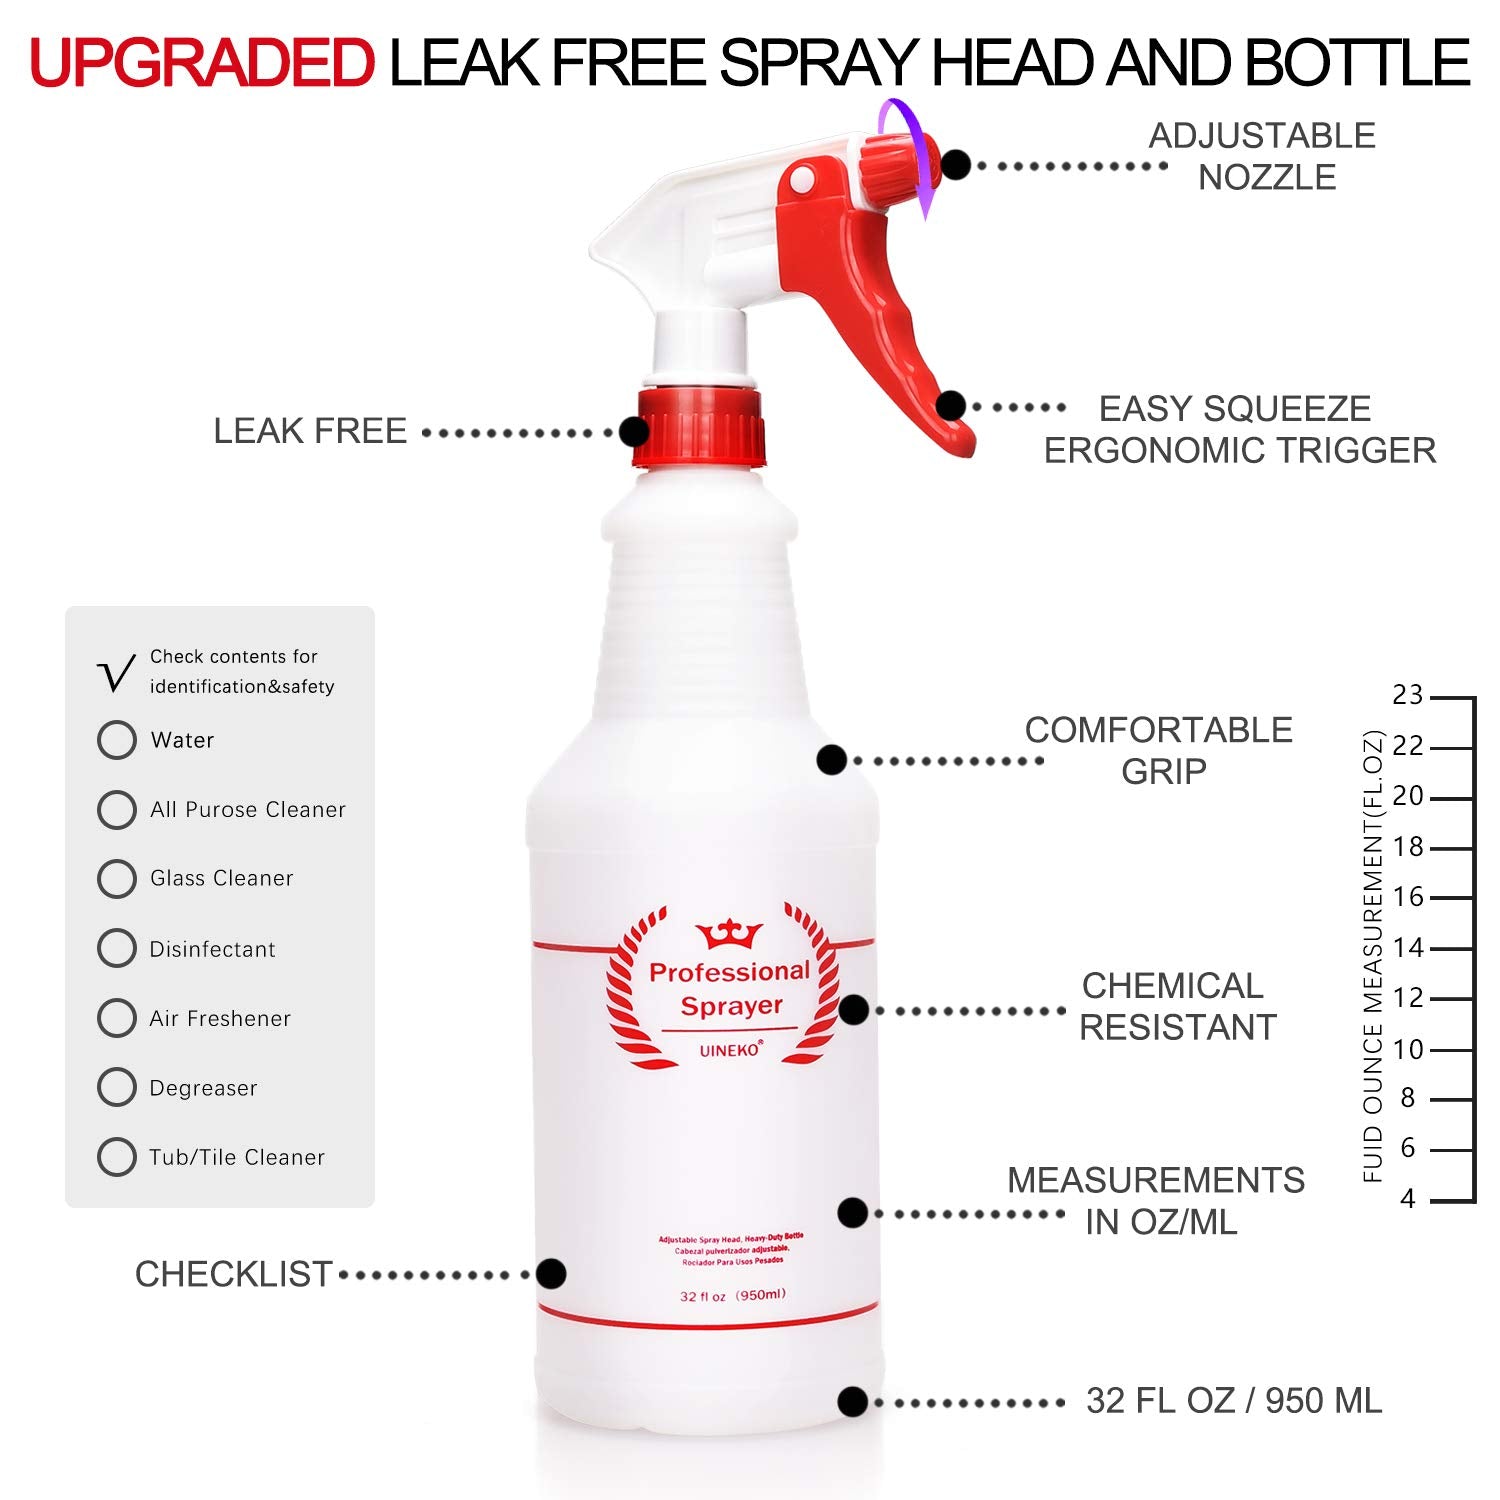 is there any spray bottle that doesn't leak? - Page 2